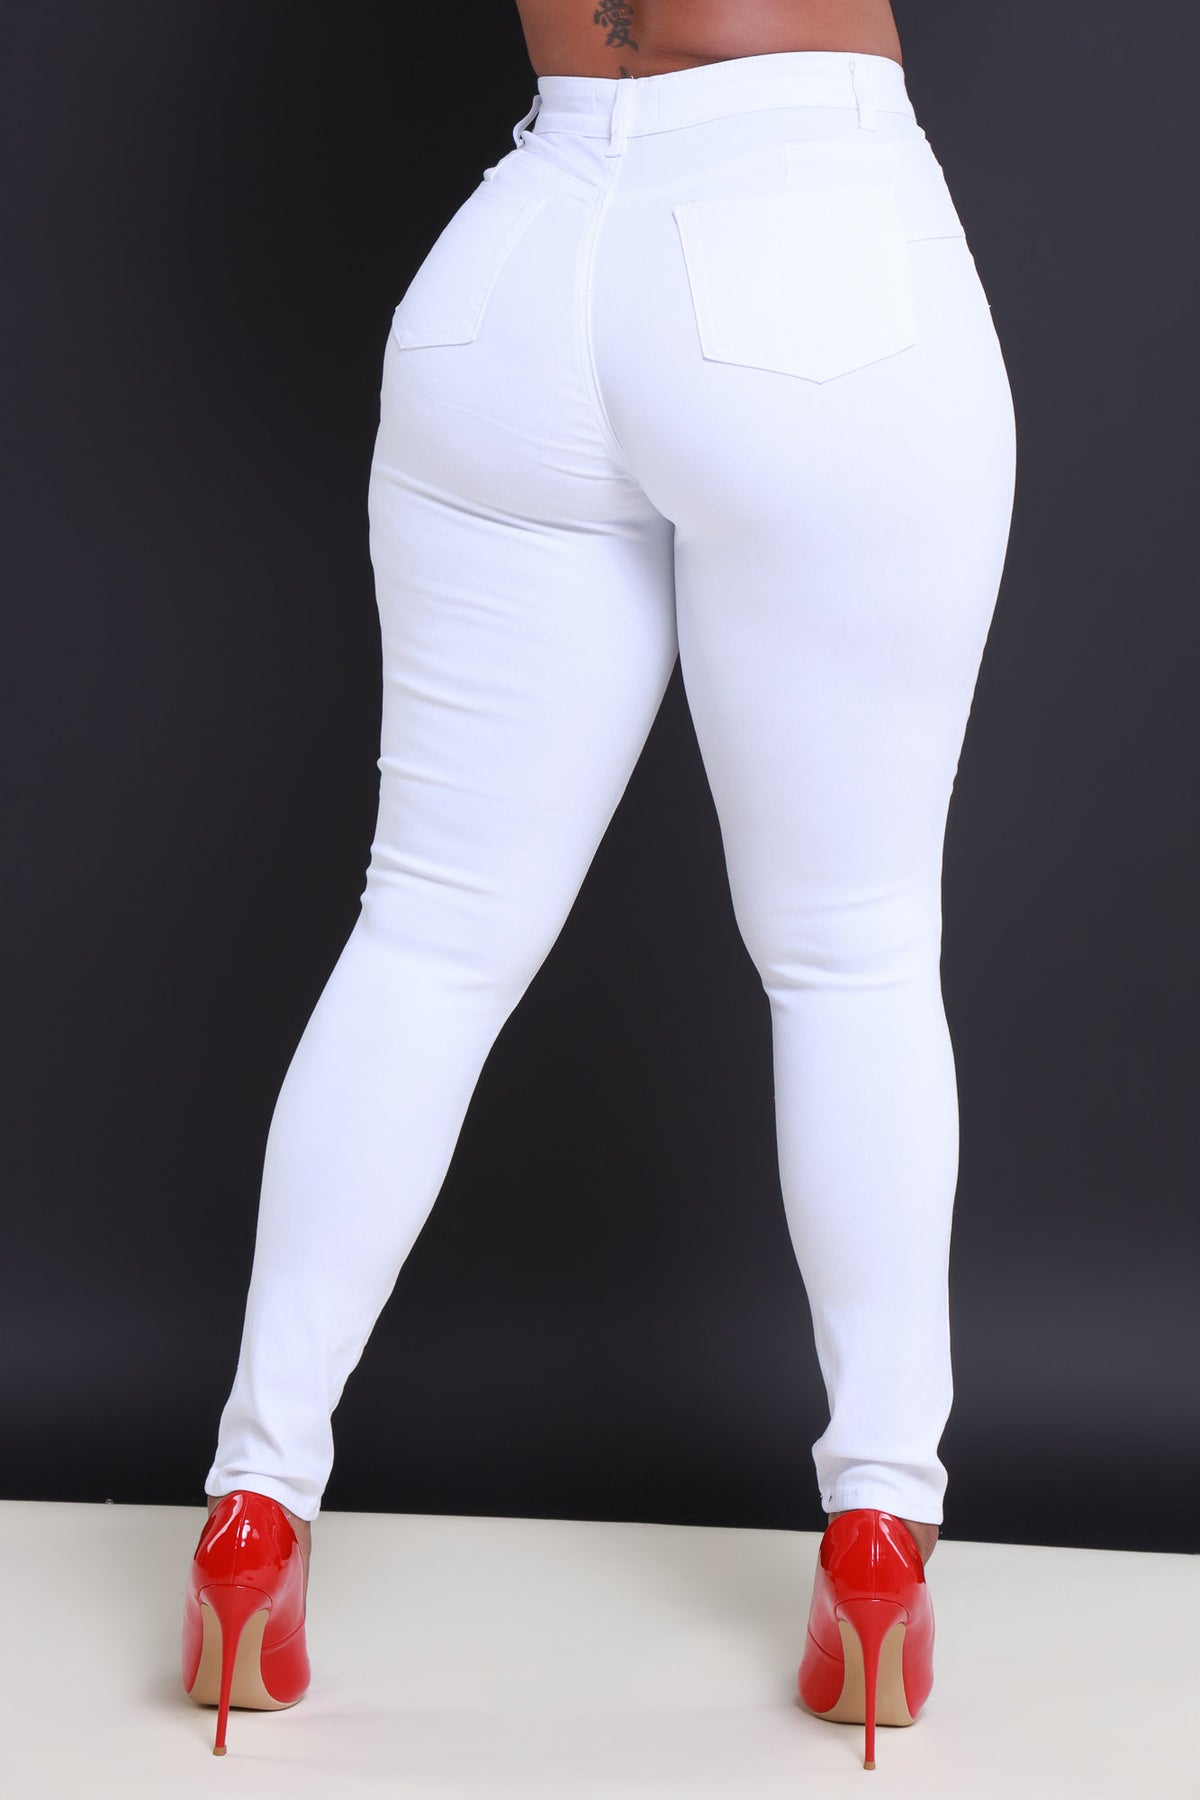 
              Blacklist Butt Lifting Mid Rise Stretchy Jeans - White - Swank A Posh
            